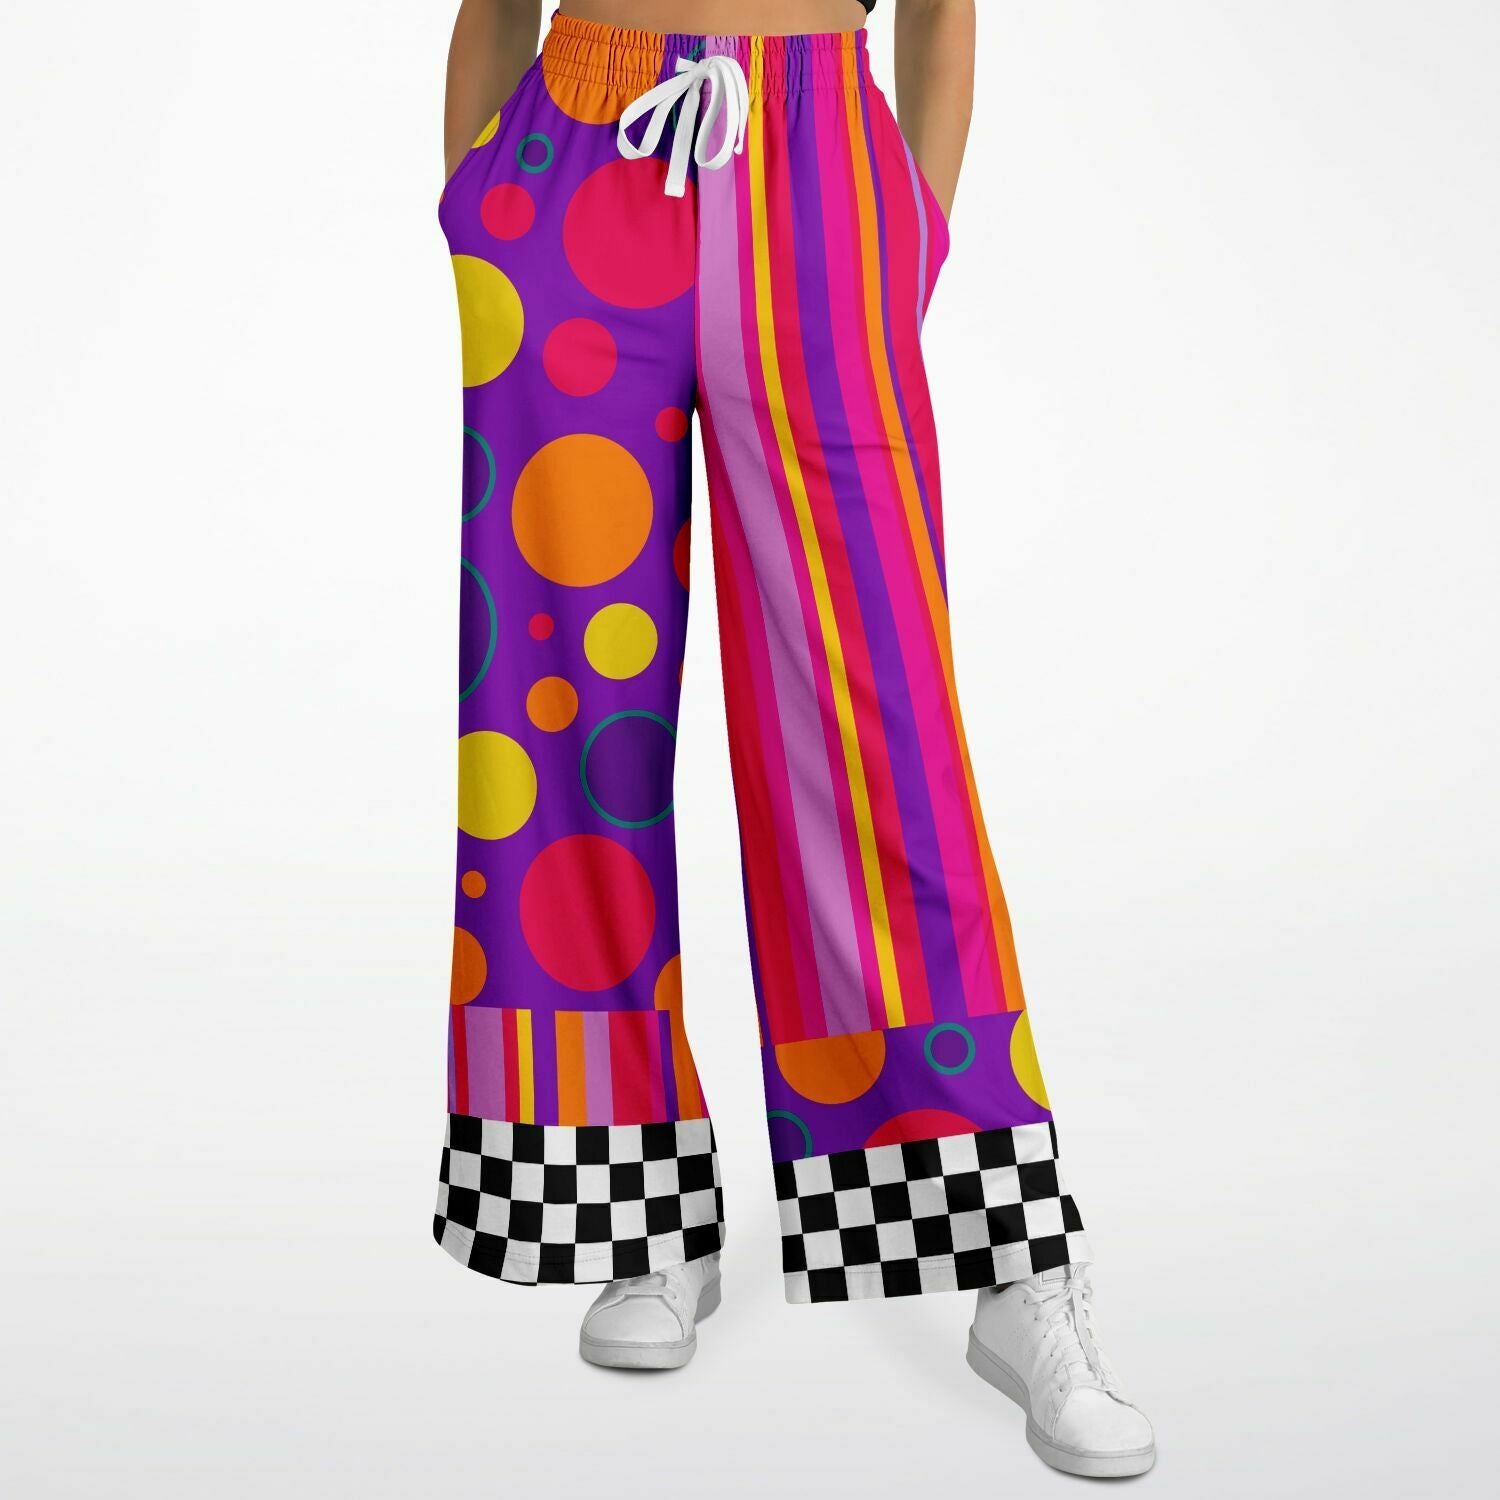 Vintage retro style flared pants for Clowns